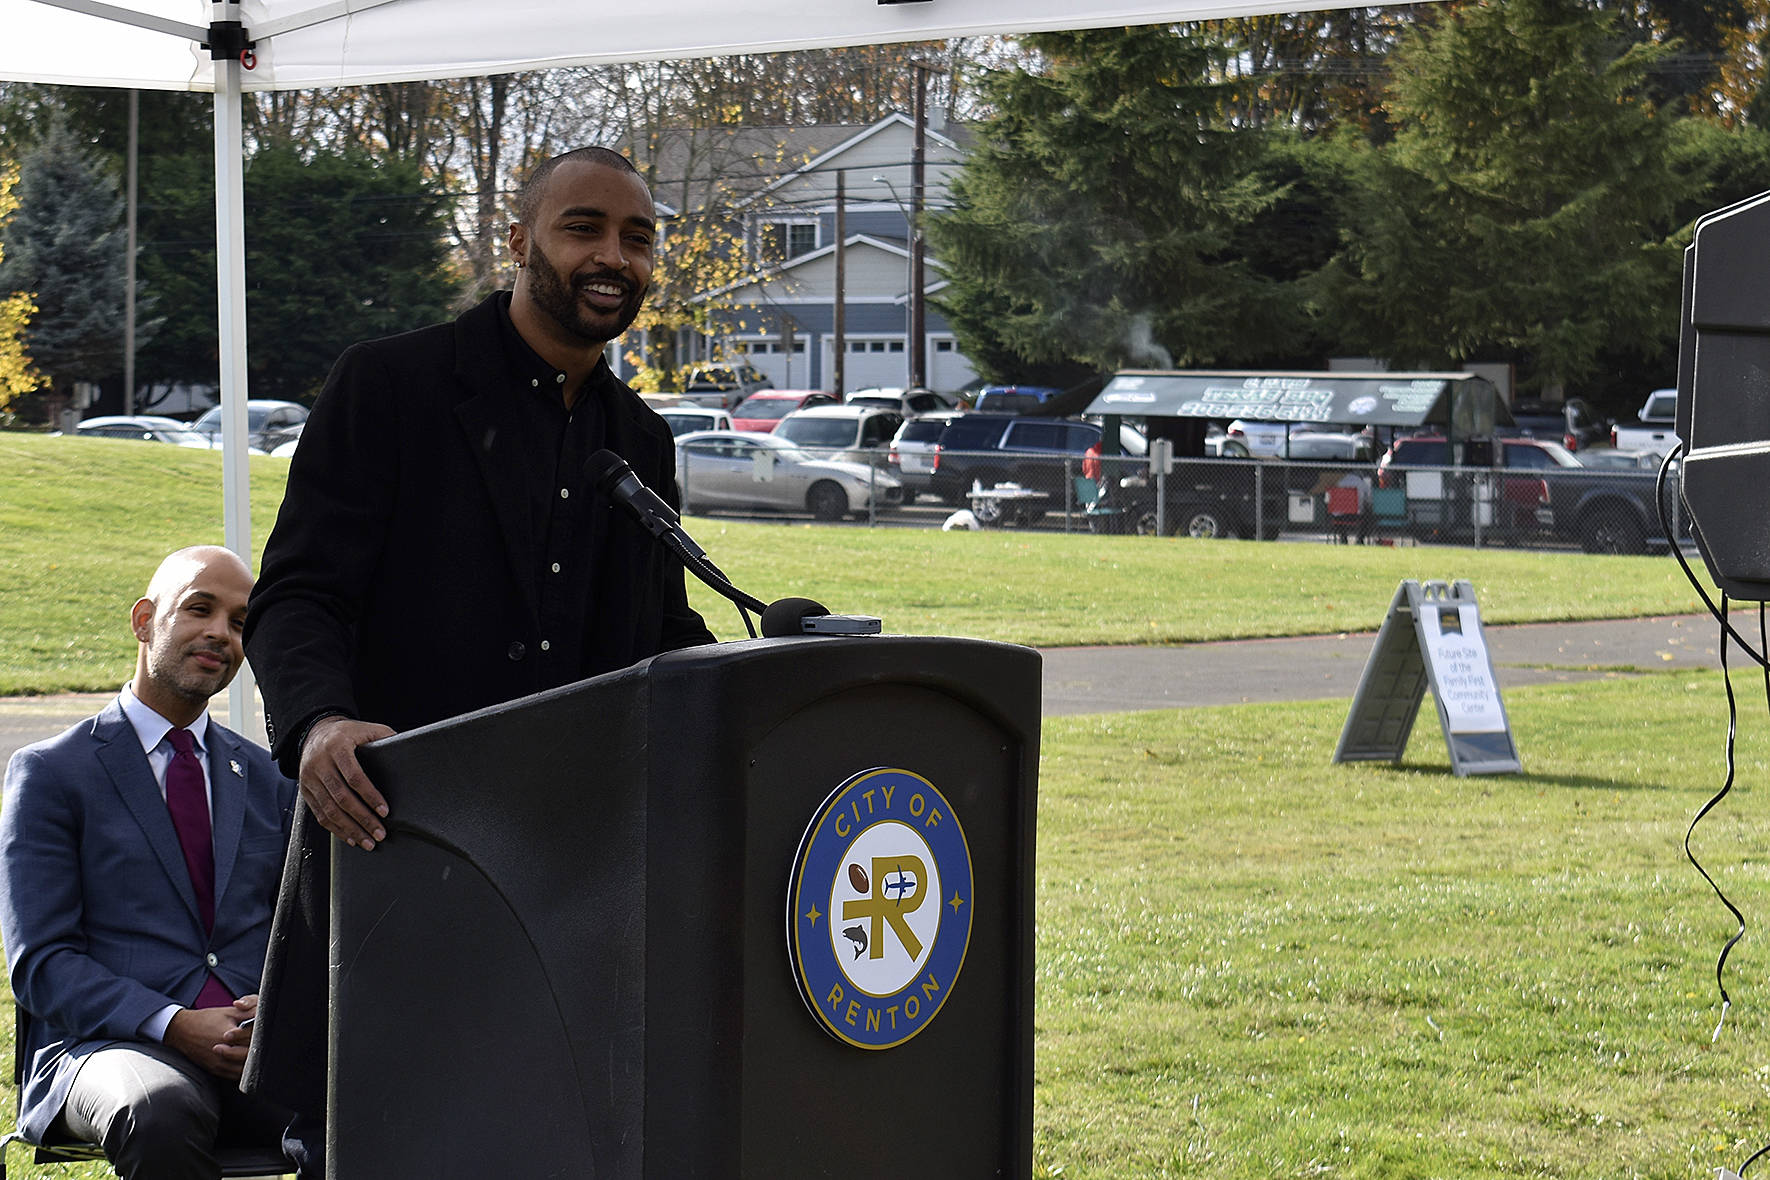 Photo by Haley Ausbun. Doug Baldwin speaking before the honorary ribbon cutting at the site for the new Family First Community Center, Saturday, Oct. 26 next to Cascade Elementary School.